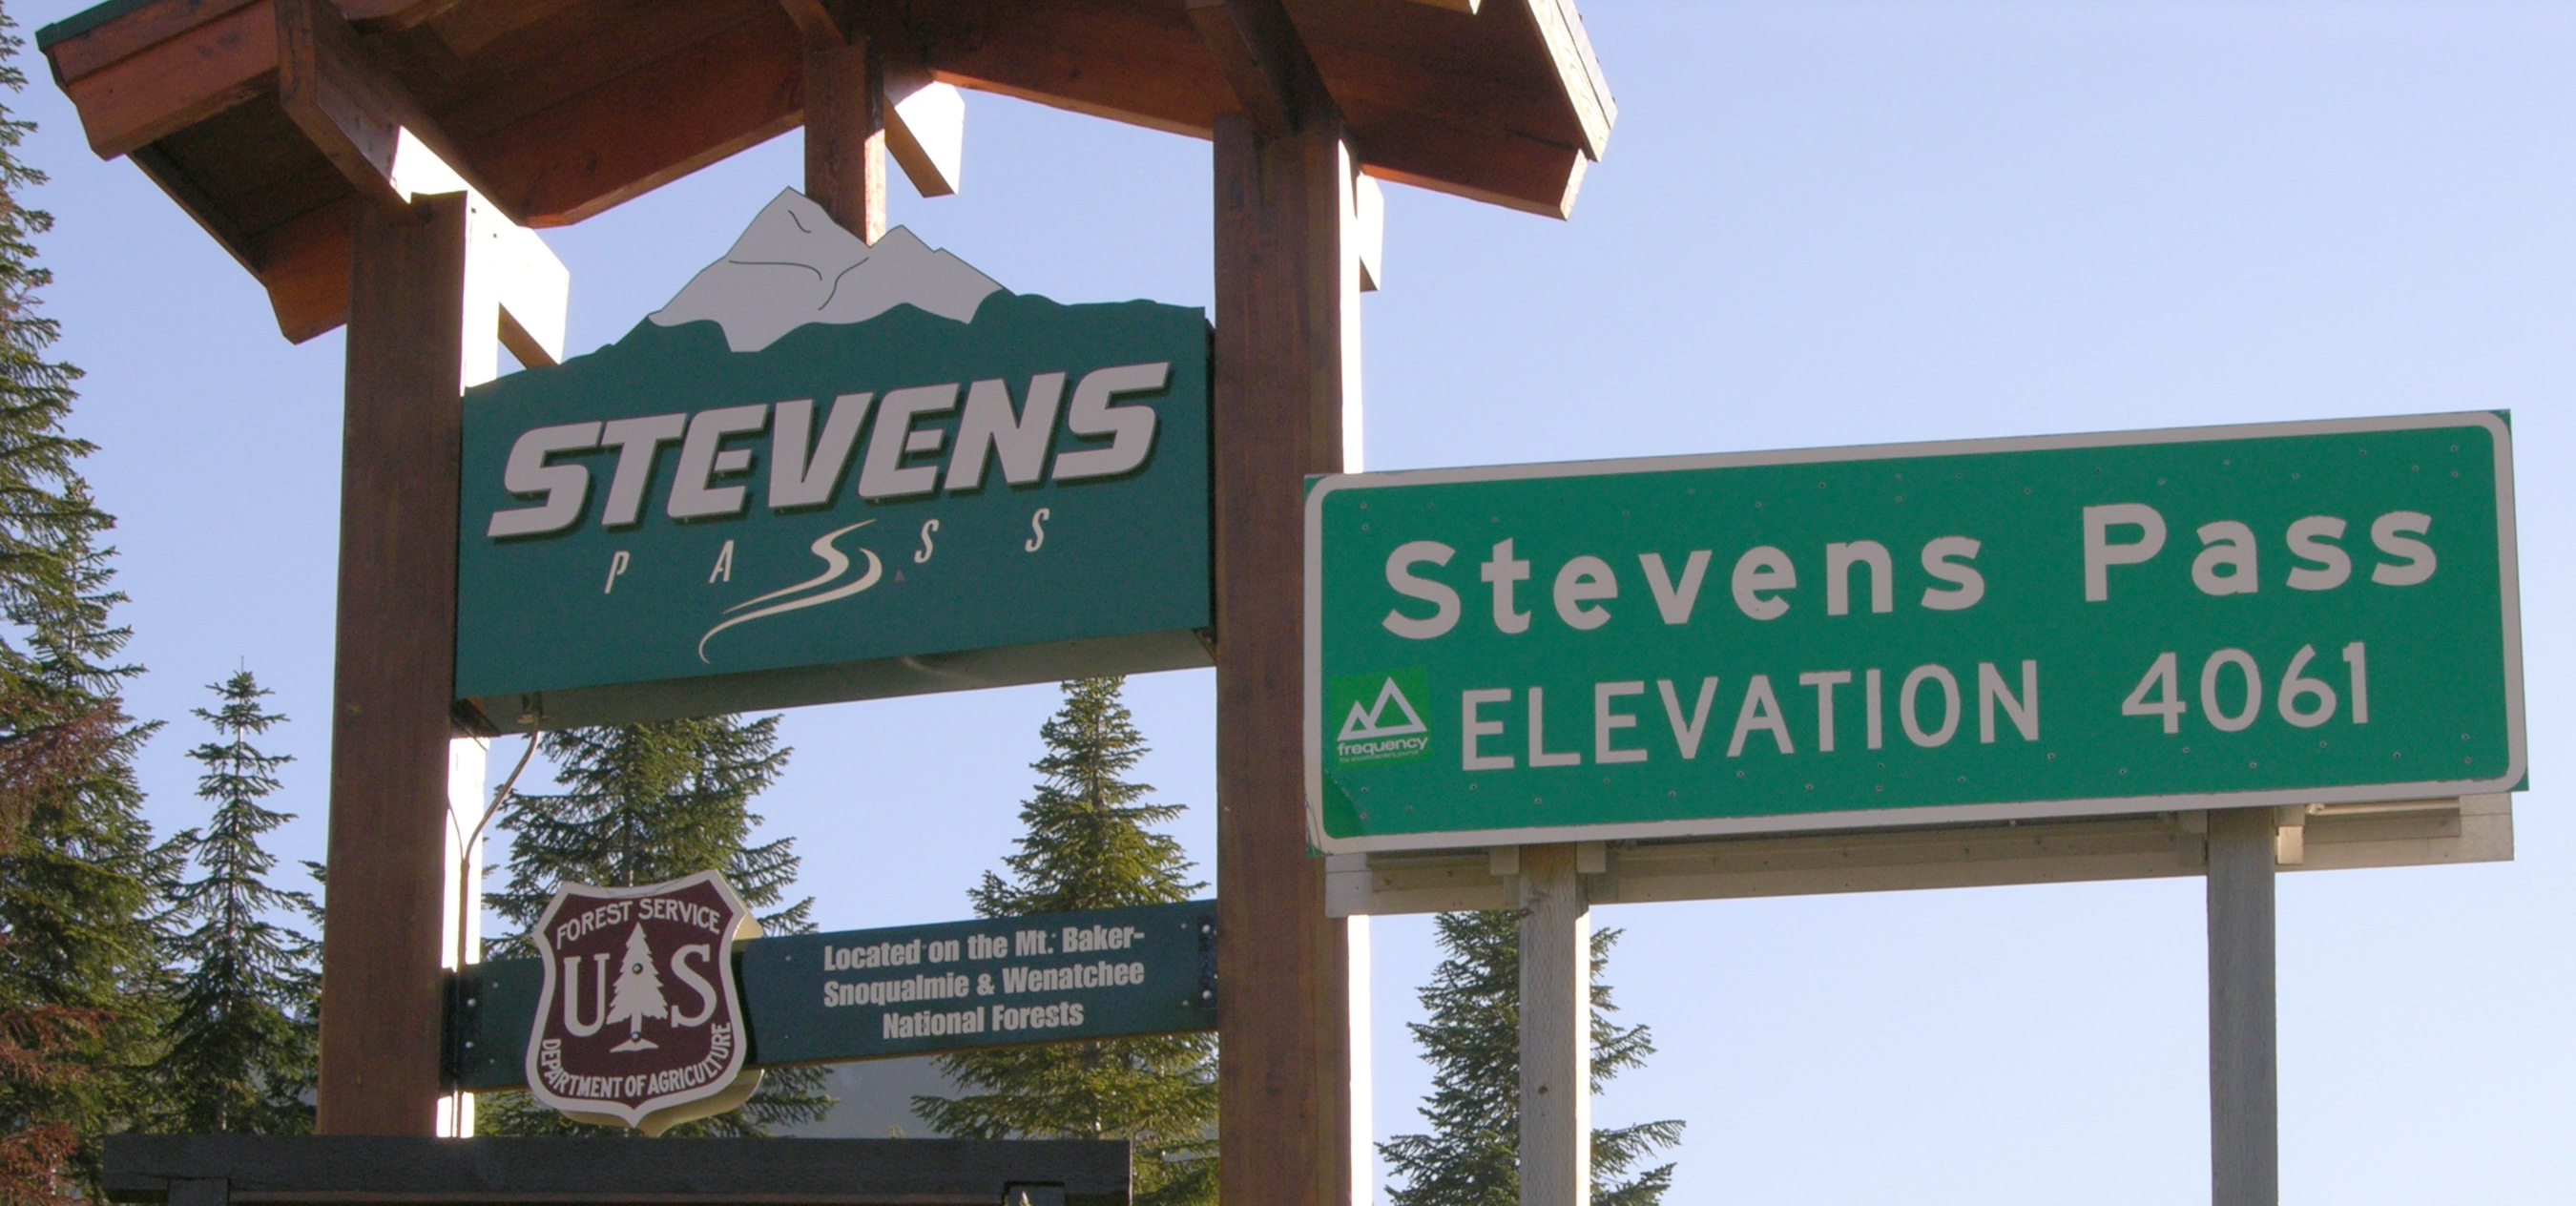 Washington Attorney General Wants To Know If You Have Complaints About Stevens Pass